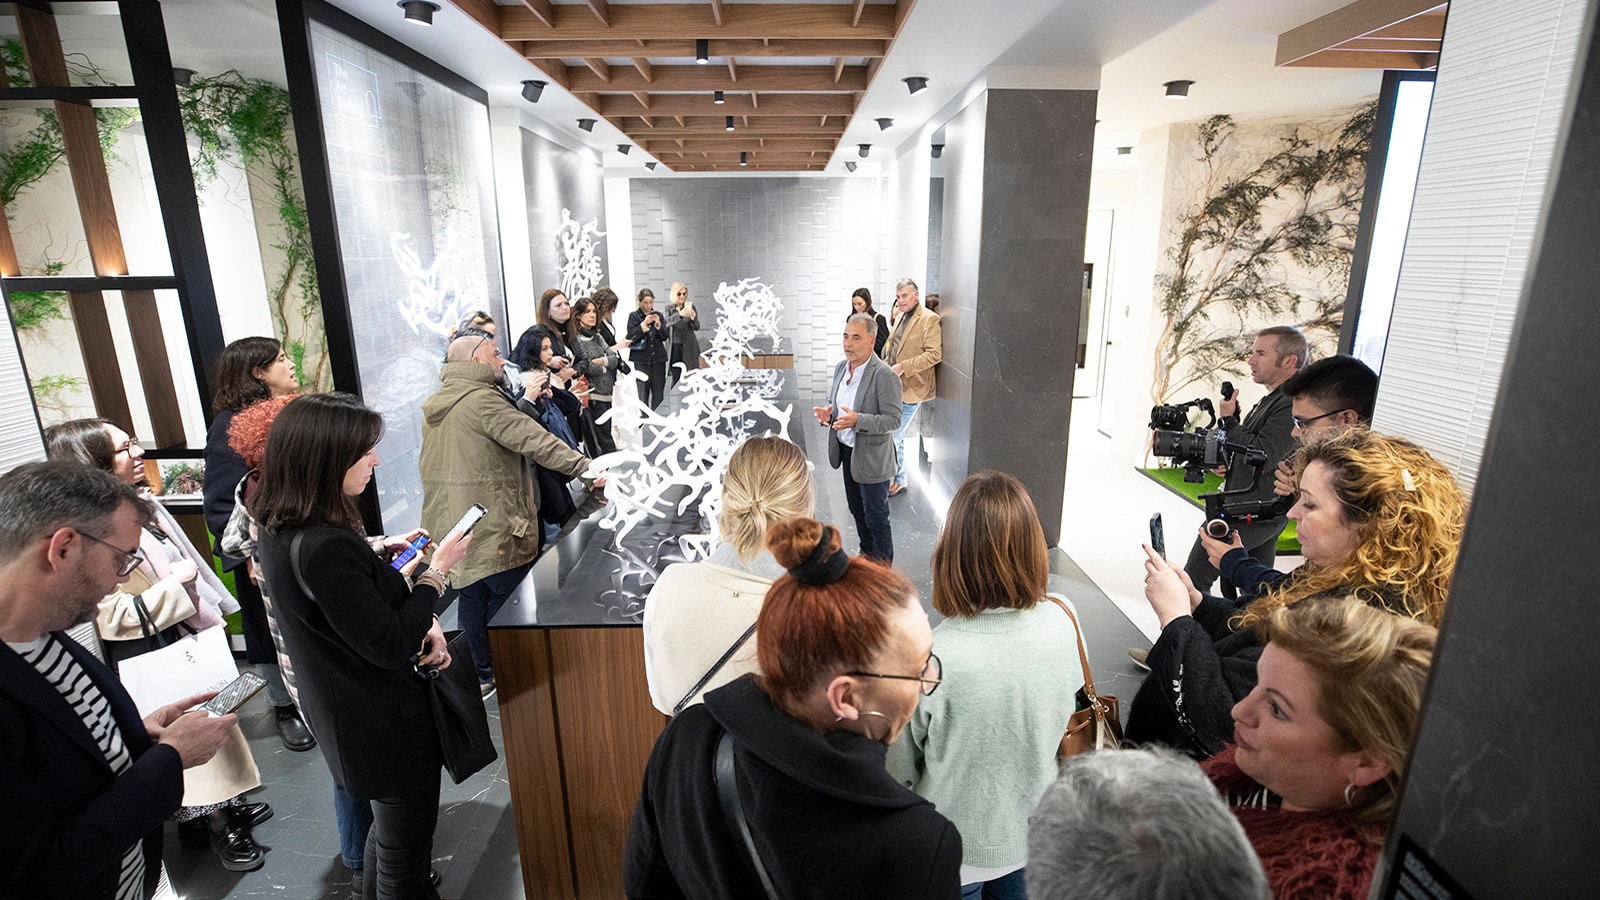 An impressive 12,000 visitors flock to the 29th Porcelanosa International Exhibition